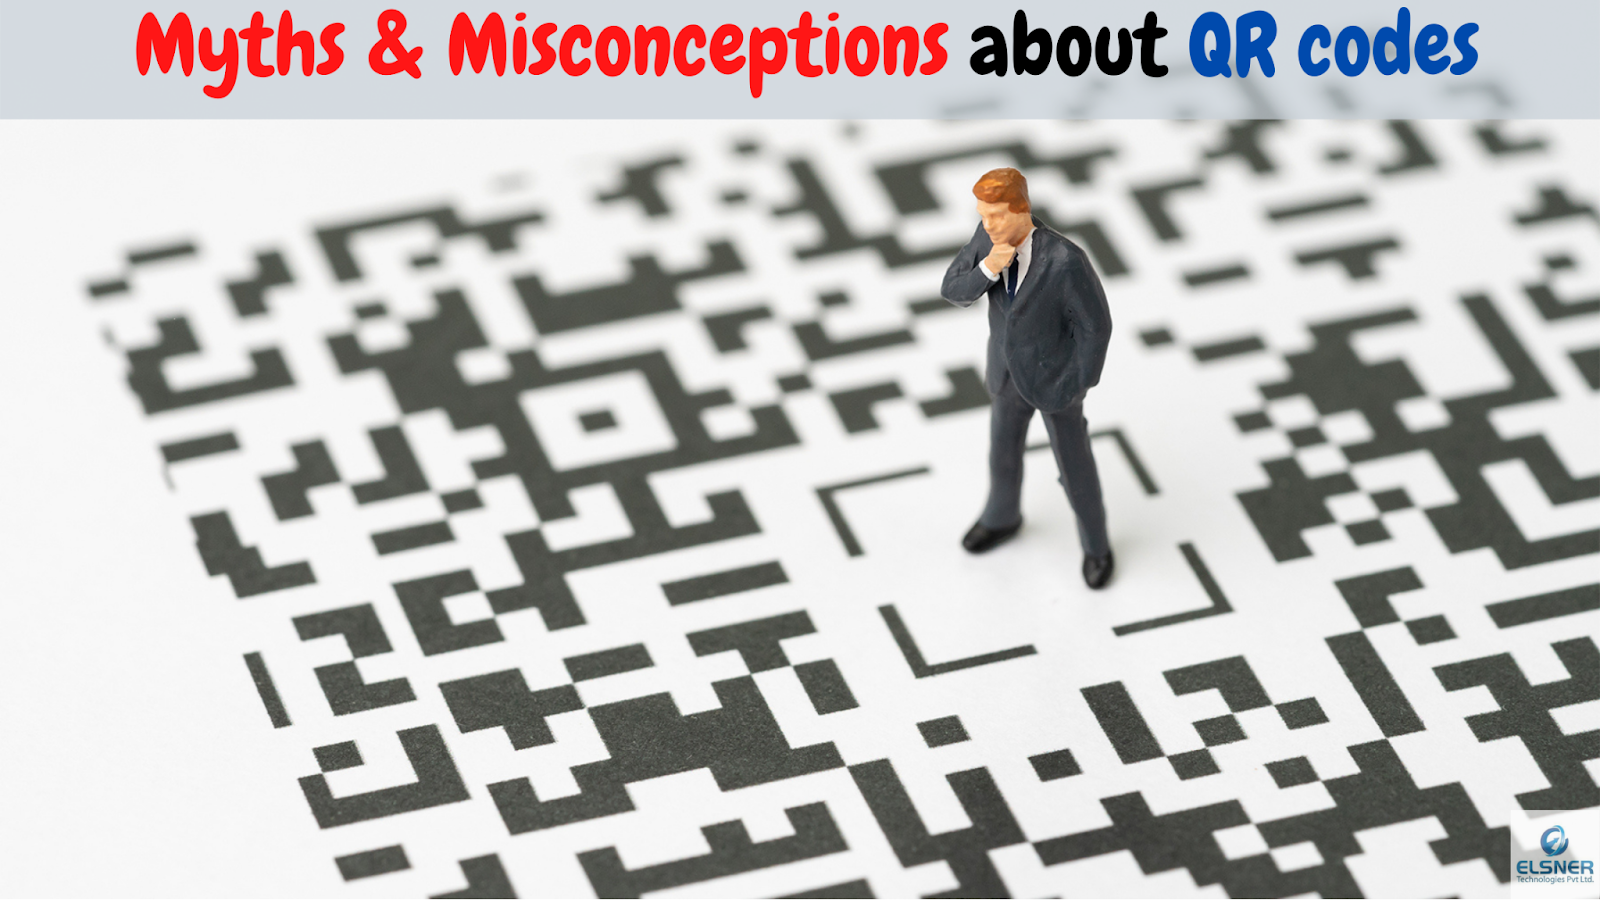 Misconceptions about QR codes